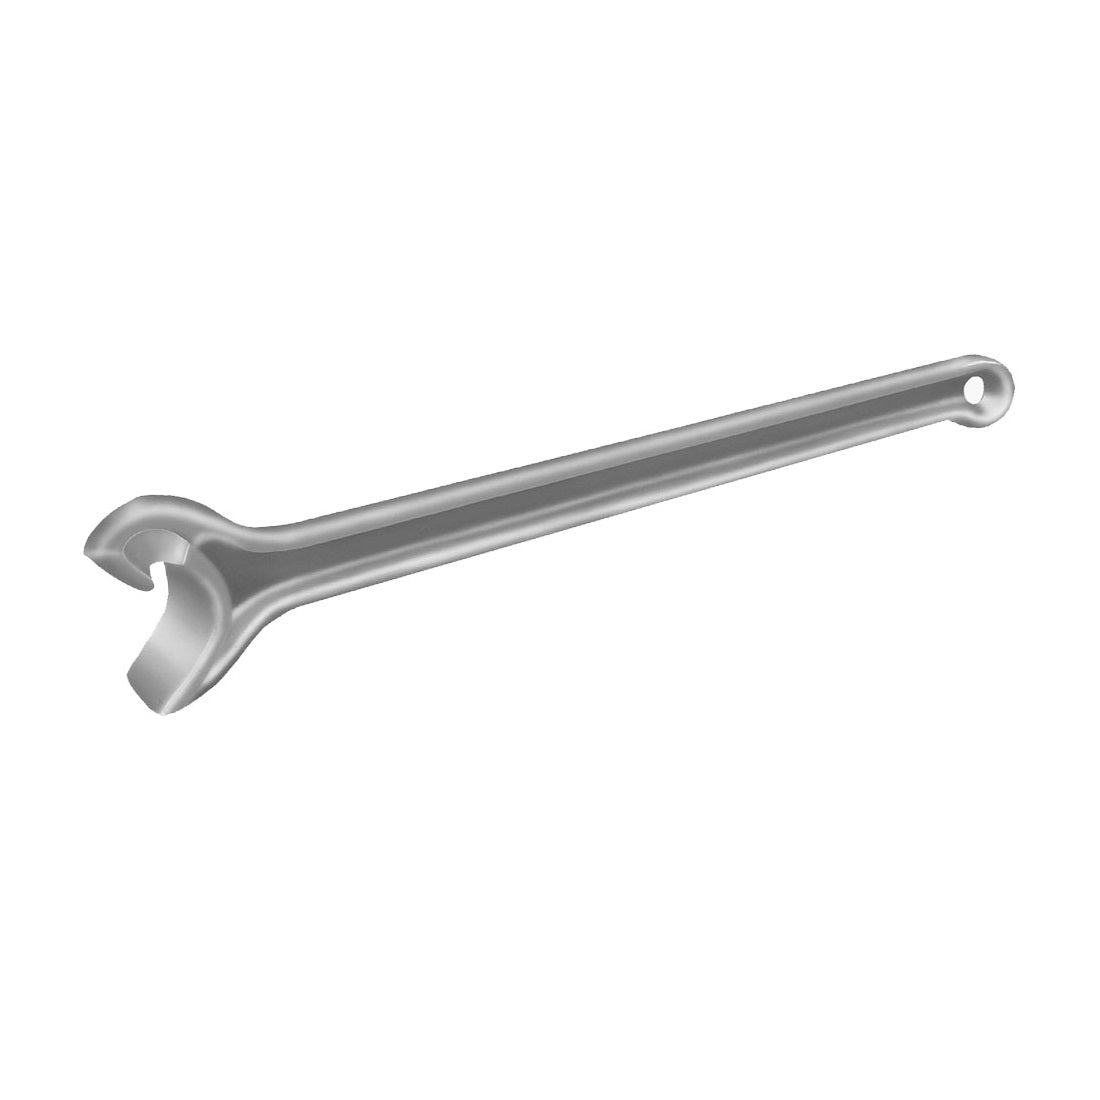 Gearench Petol Valve Cage Wrench